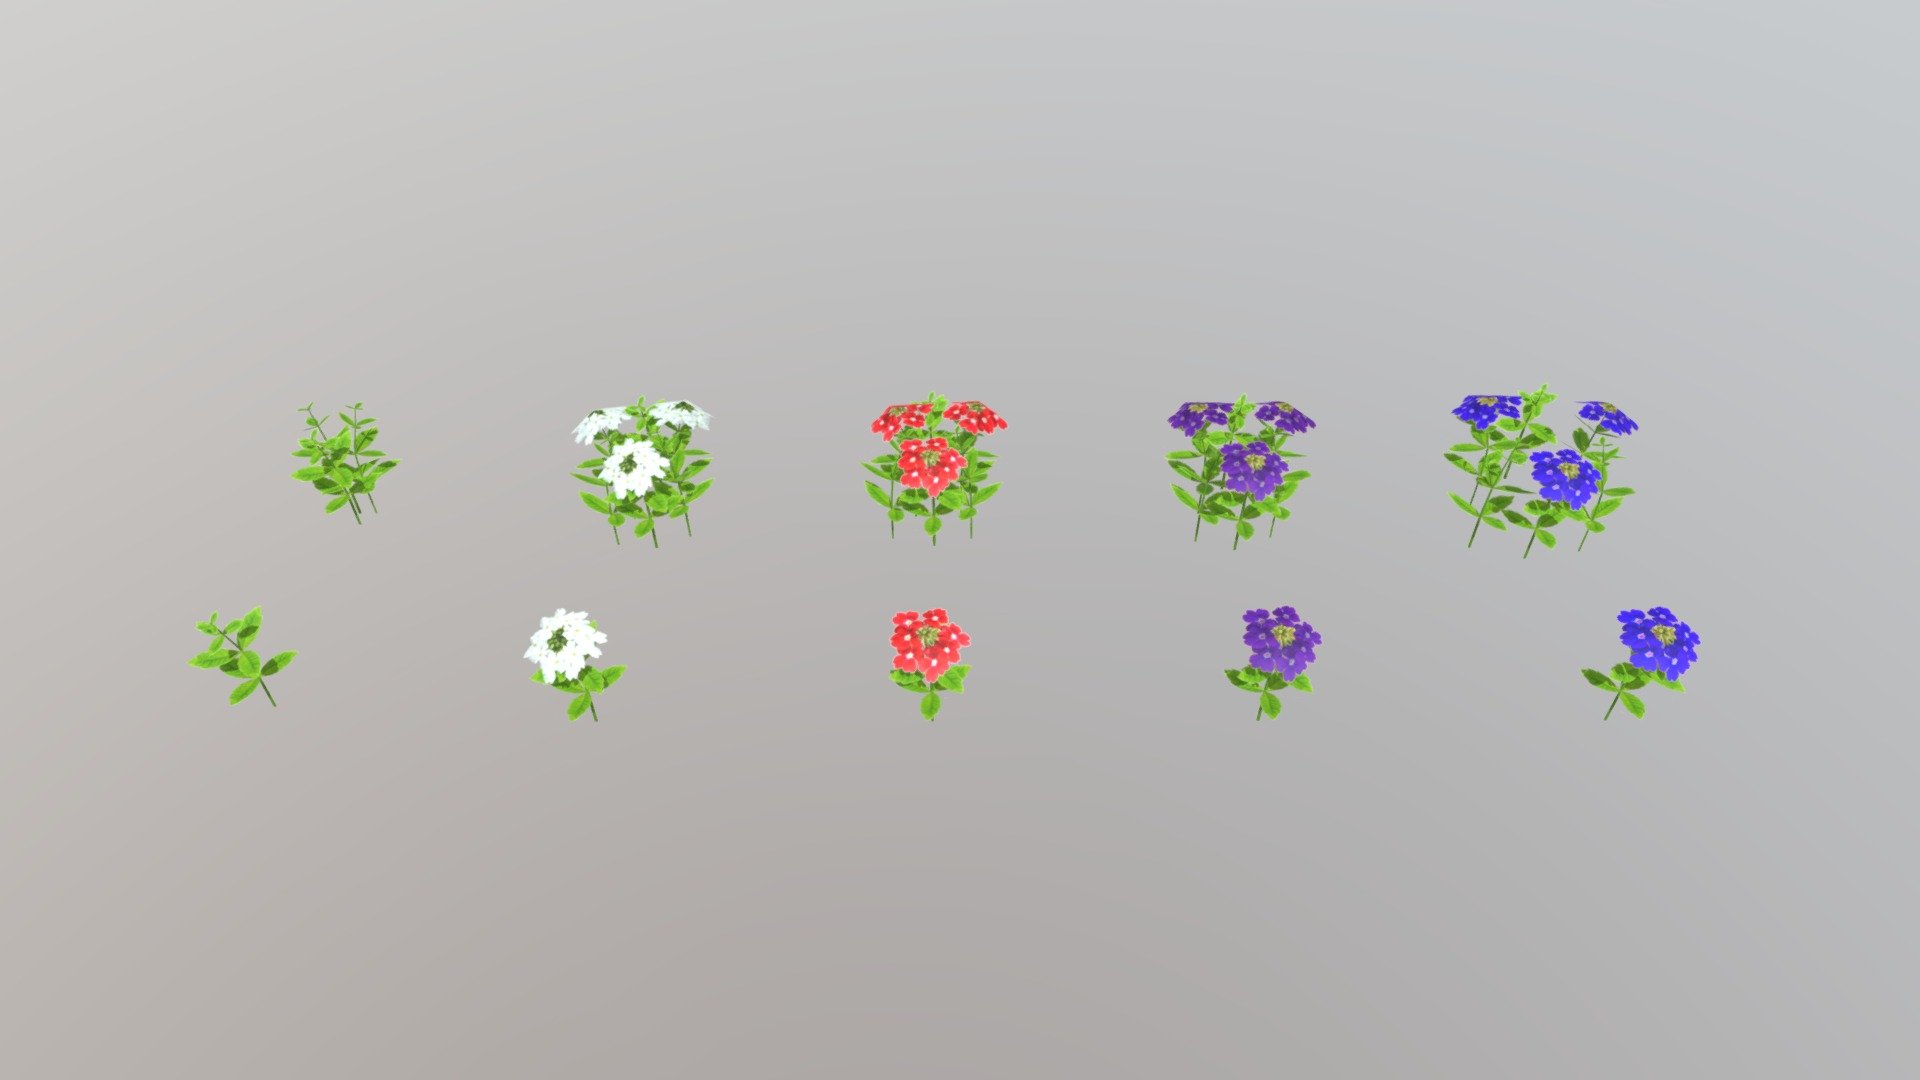 Low Poly Verbena Flowers
Blue, Violet, Red, and White.
OBJ file type 3d model